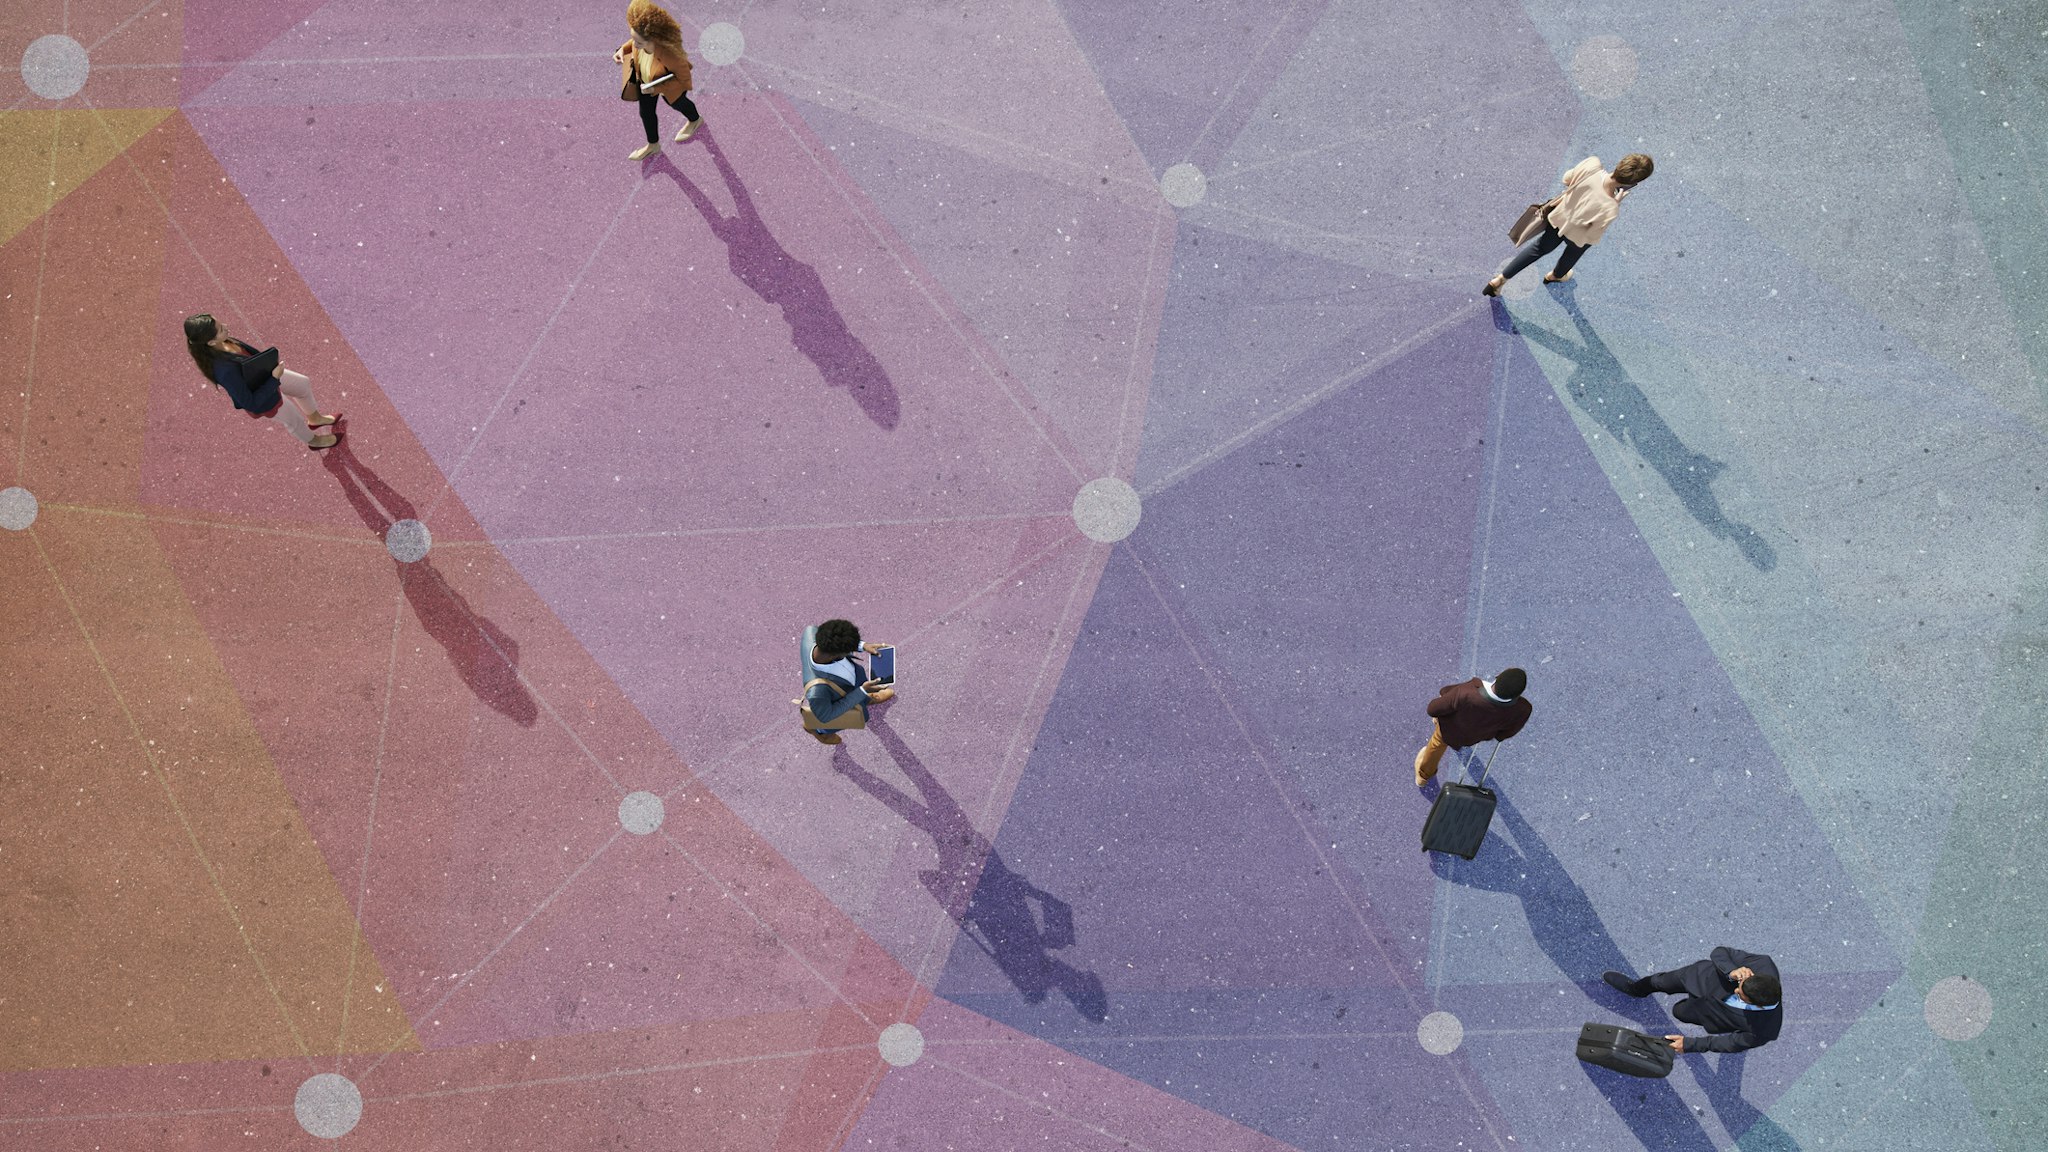 Top view of people walking in different directions of pattern, painted on asphalt - stock photo